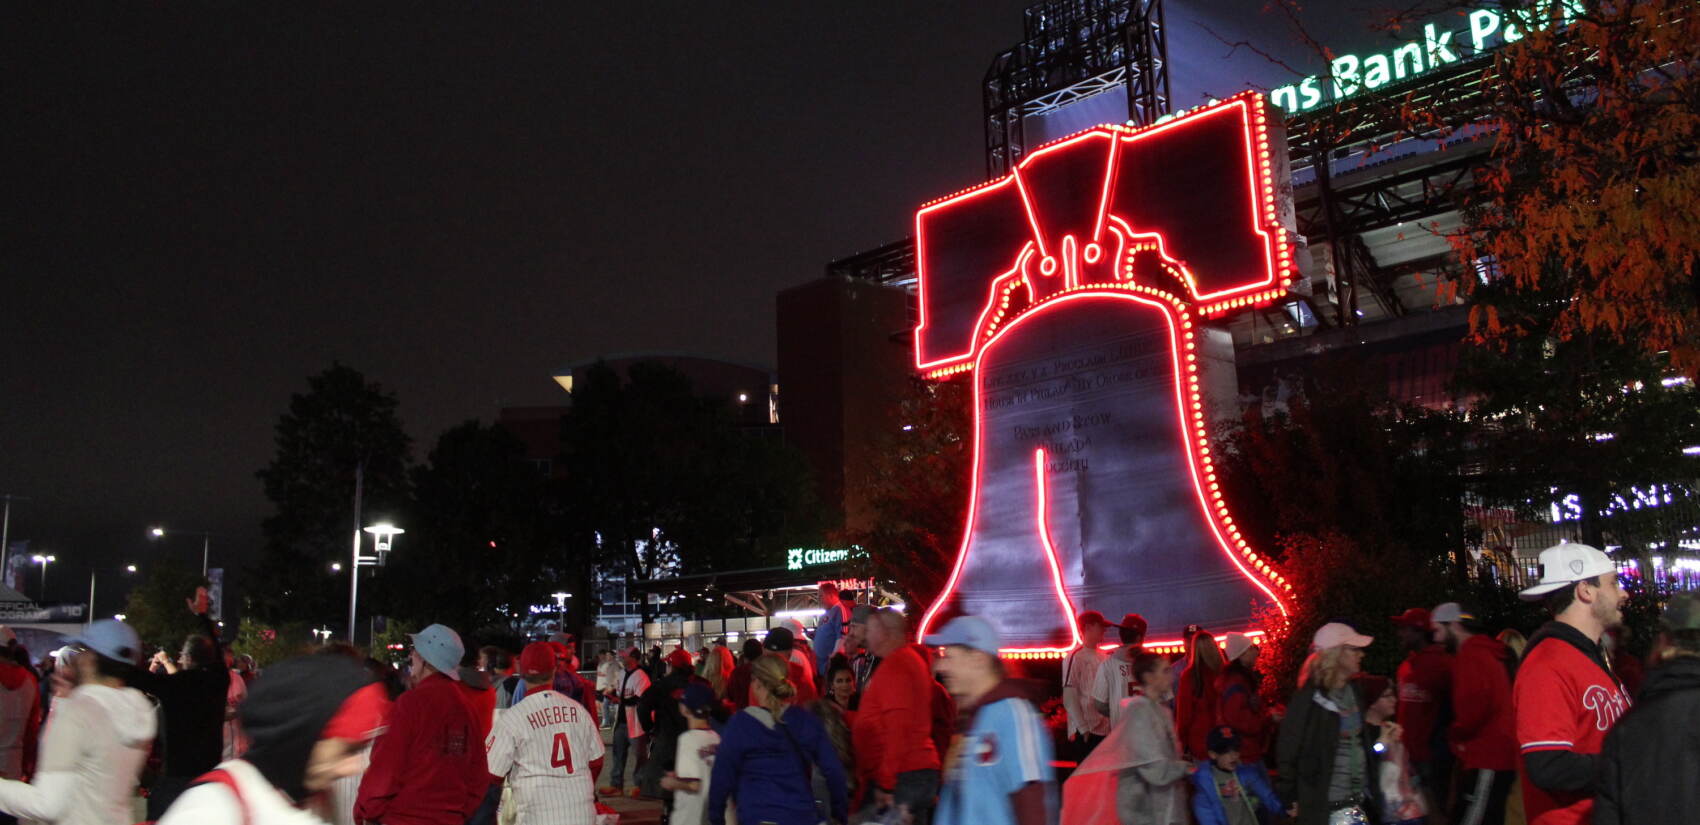 People celebrate outside of Citizens Bank Park.